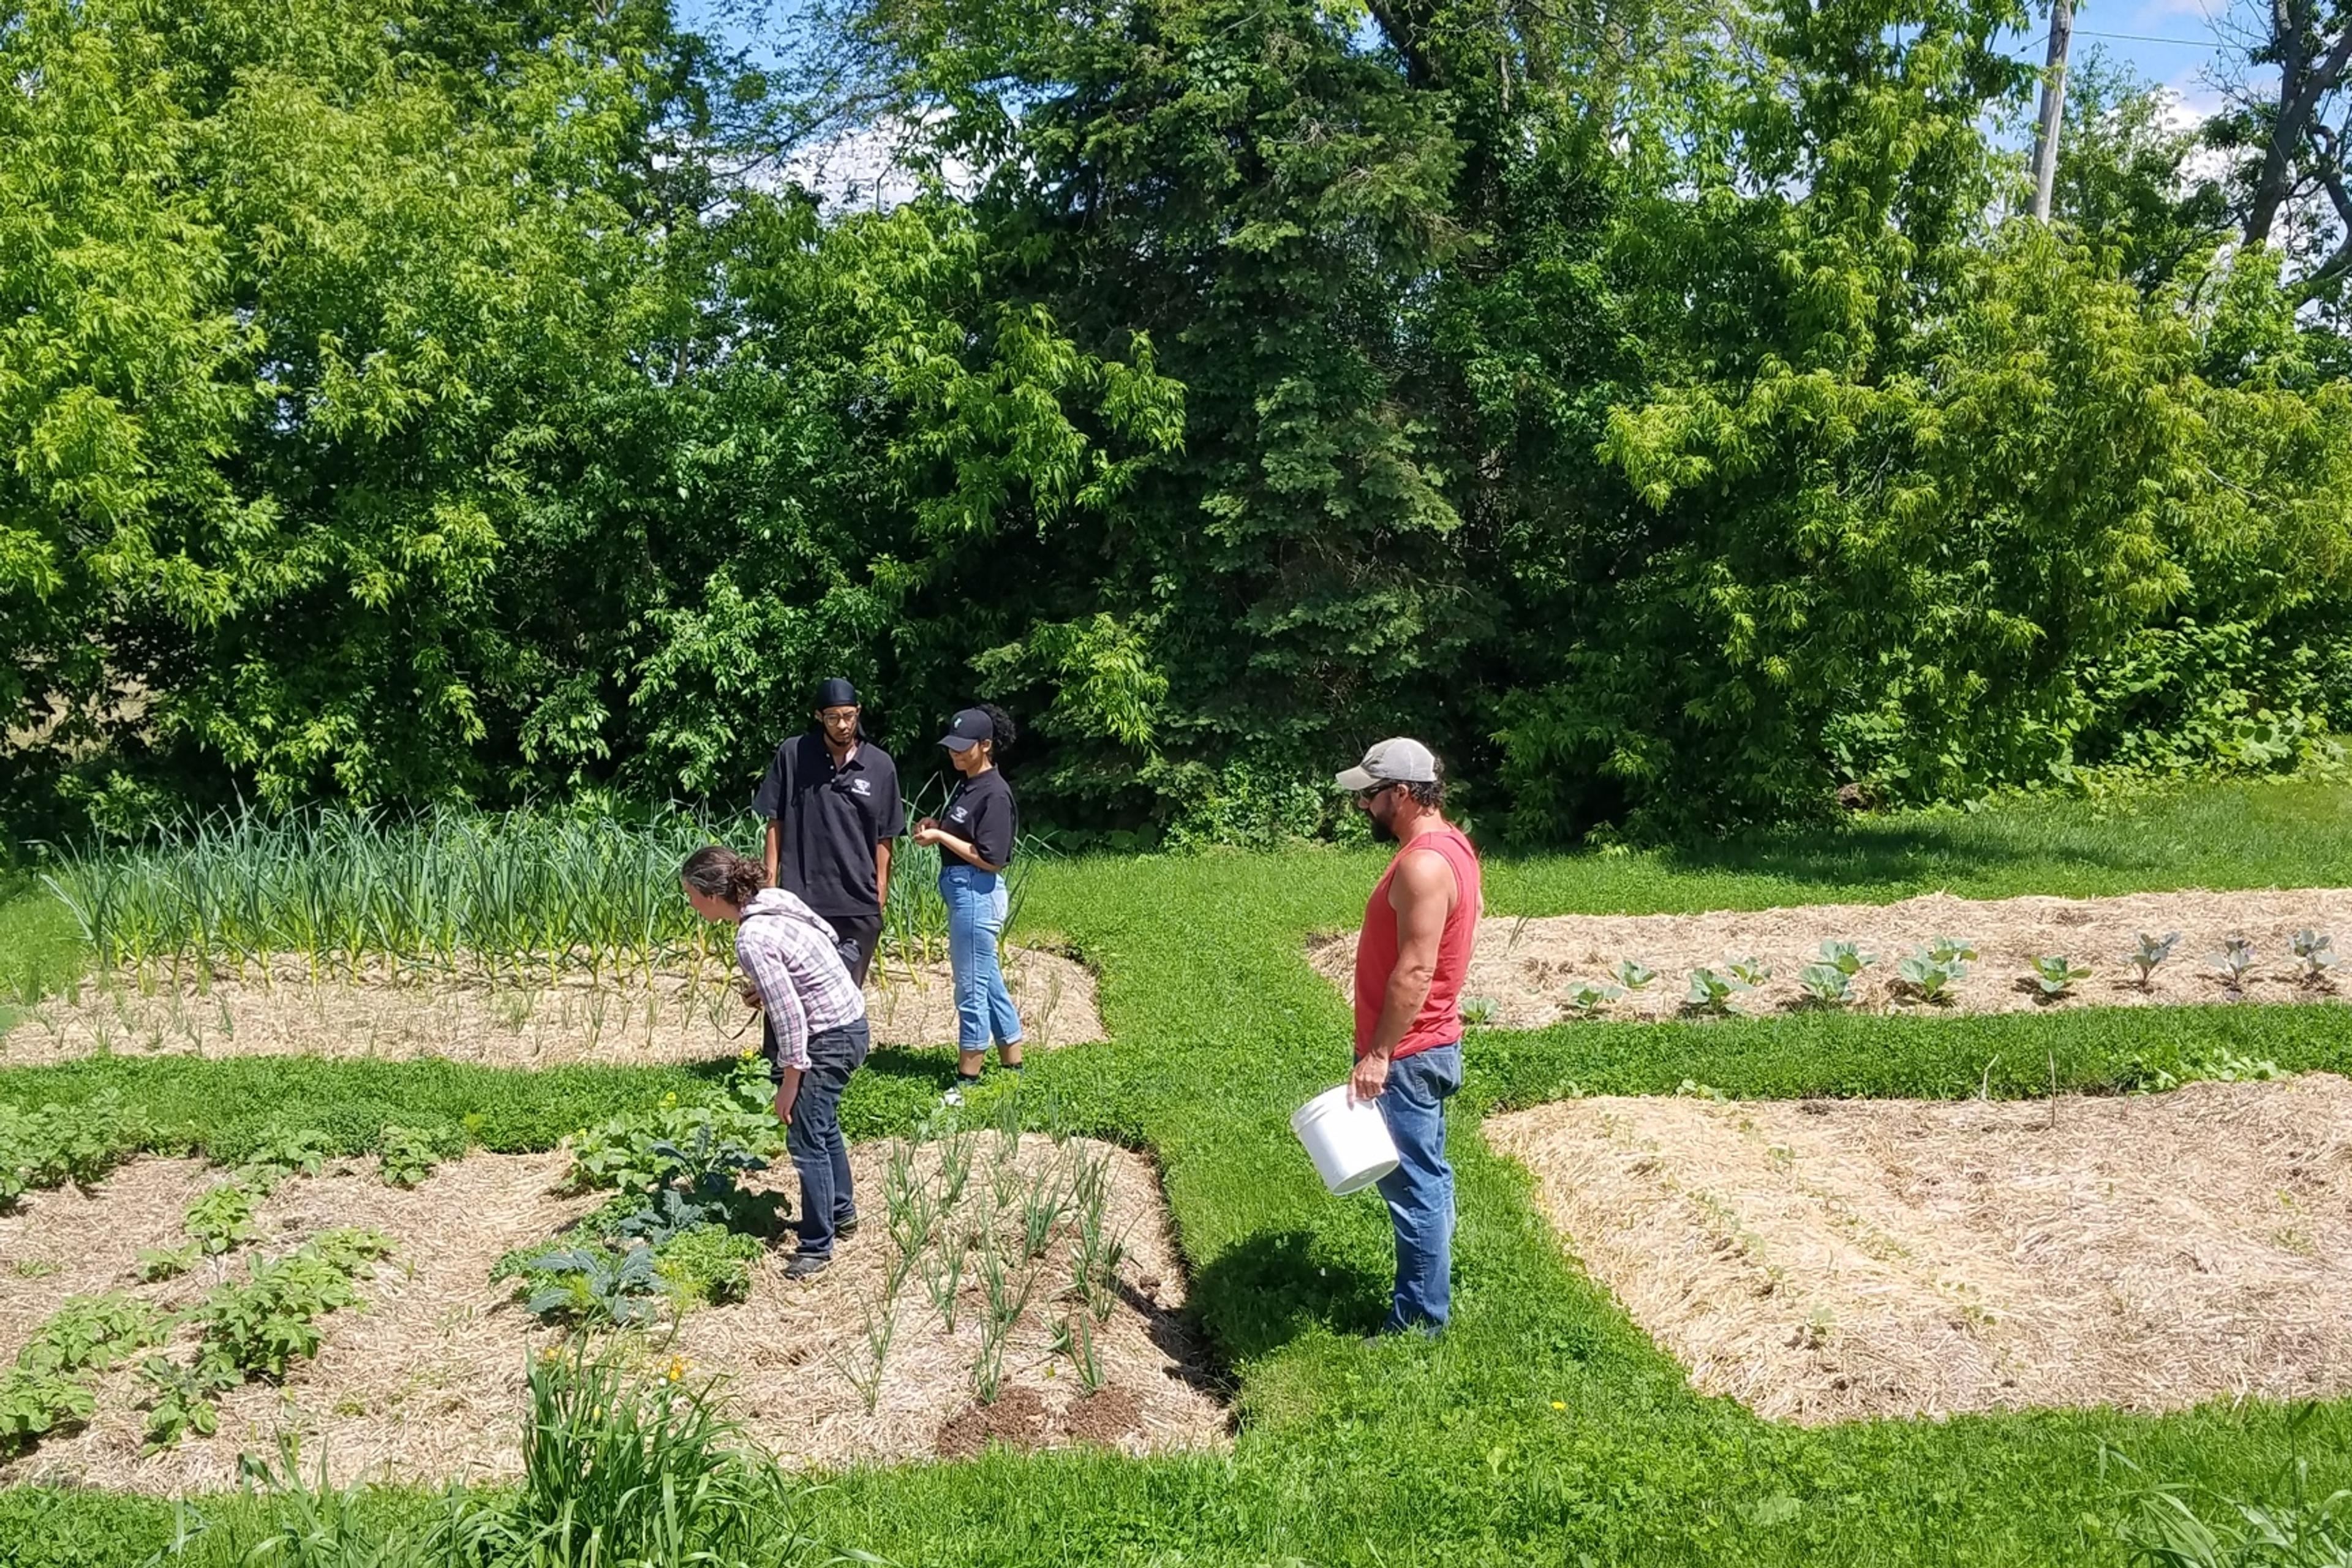 Four people look around a garden plot that has a variety of vegetable plants.